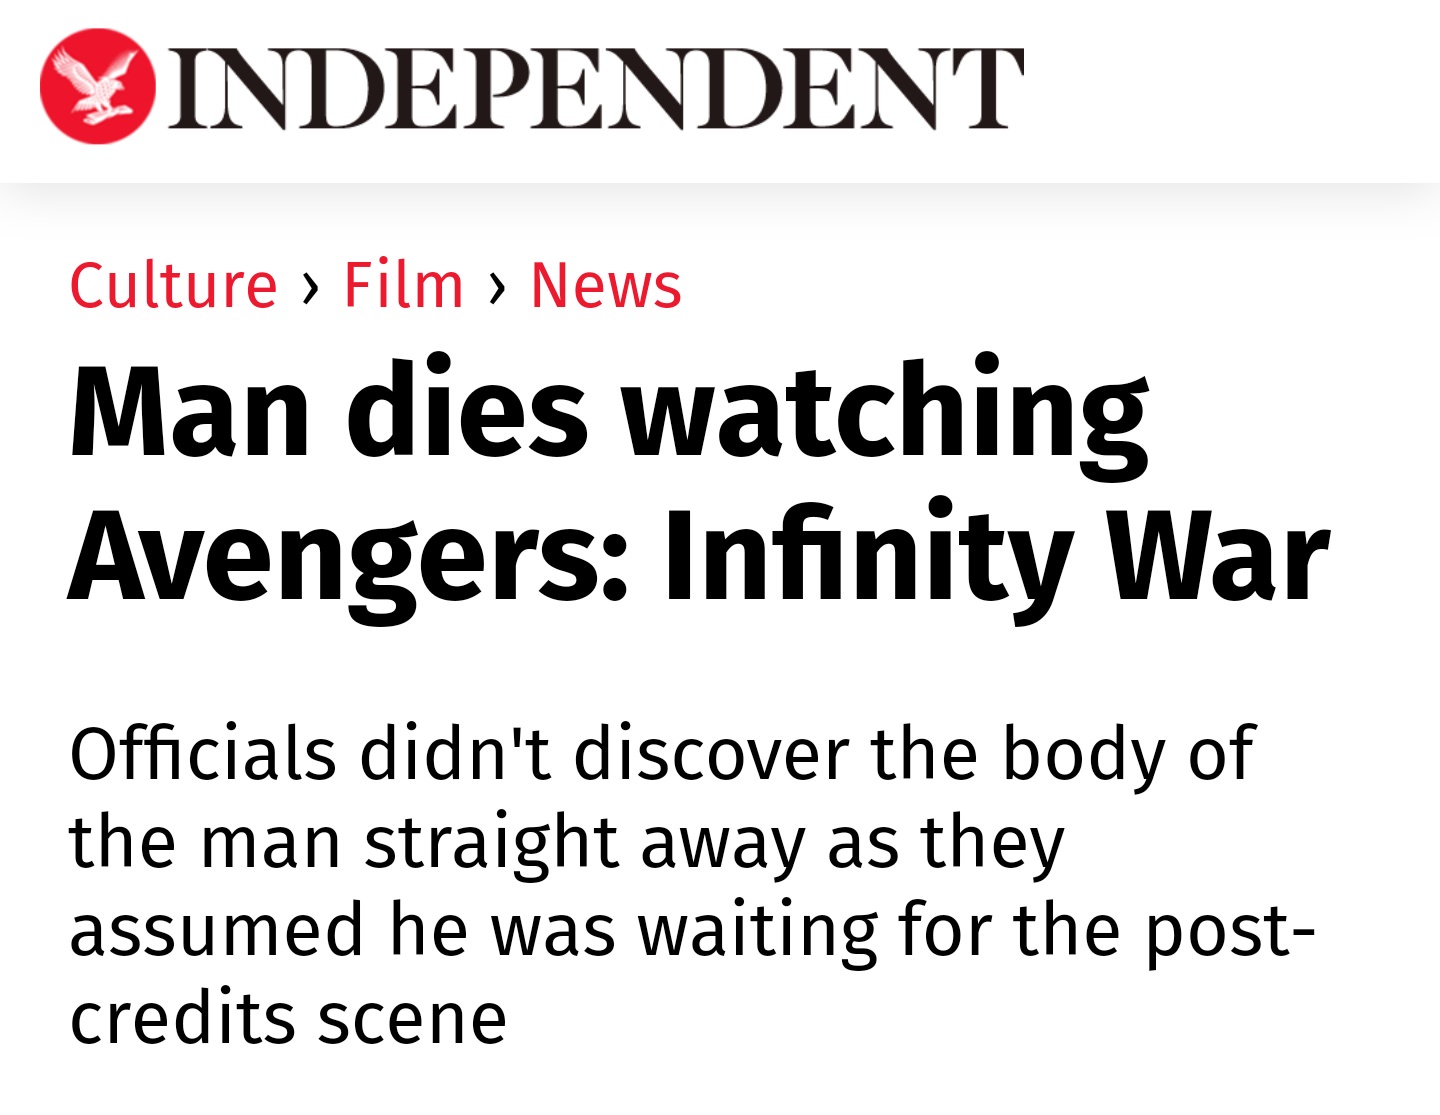 rare cancer homosexuals - Independent Culture > Film > News Man dies watching Avengers Infinity War Officials didn't discover the body of the man straight away as they assumed he was waiting for the post credits scene